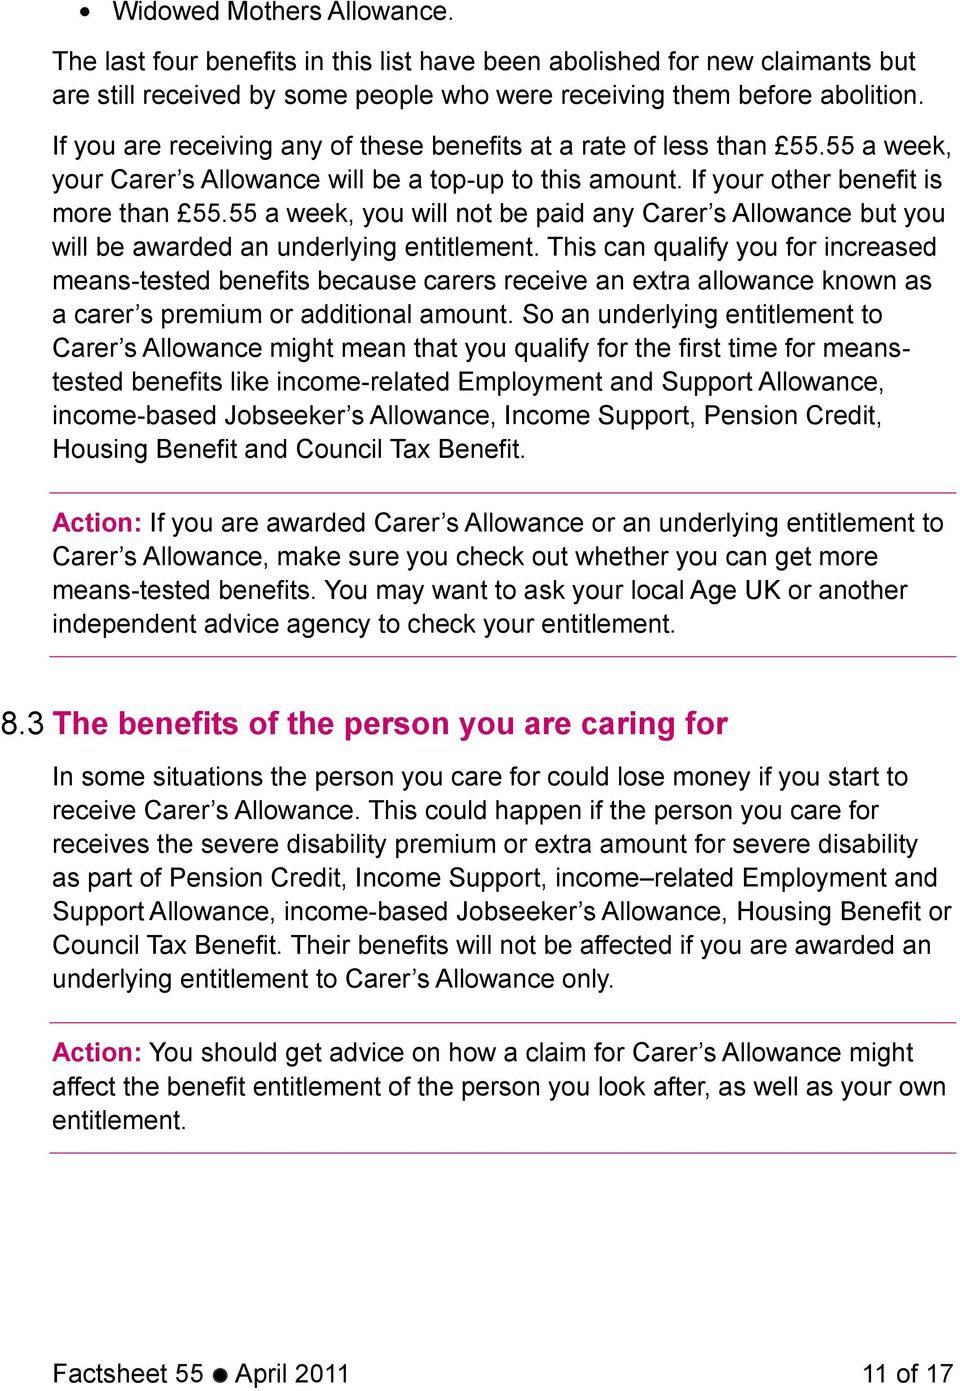 55 a week, you will not be paid any Carer s Allowance but you will be awarded an underlying entitlement.